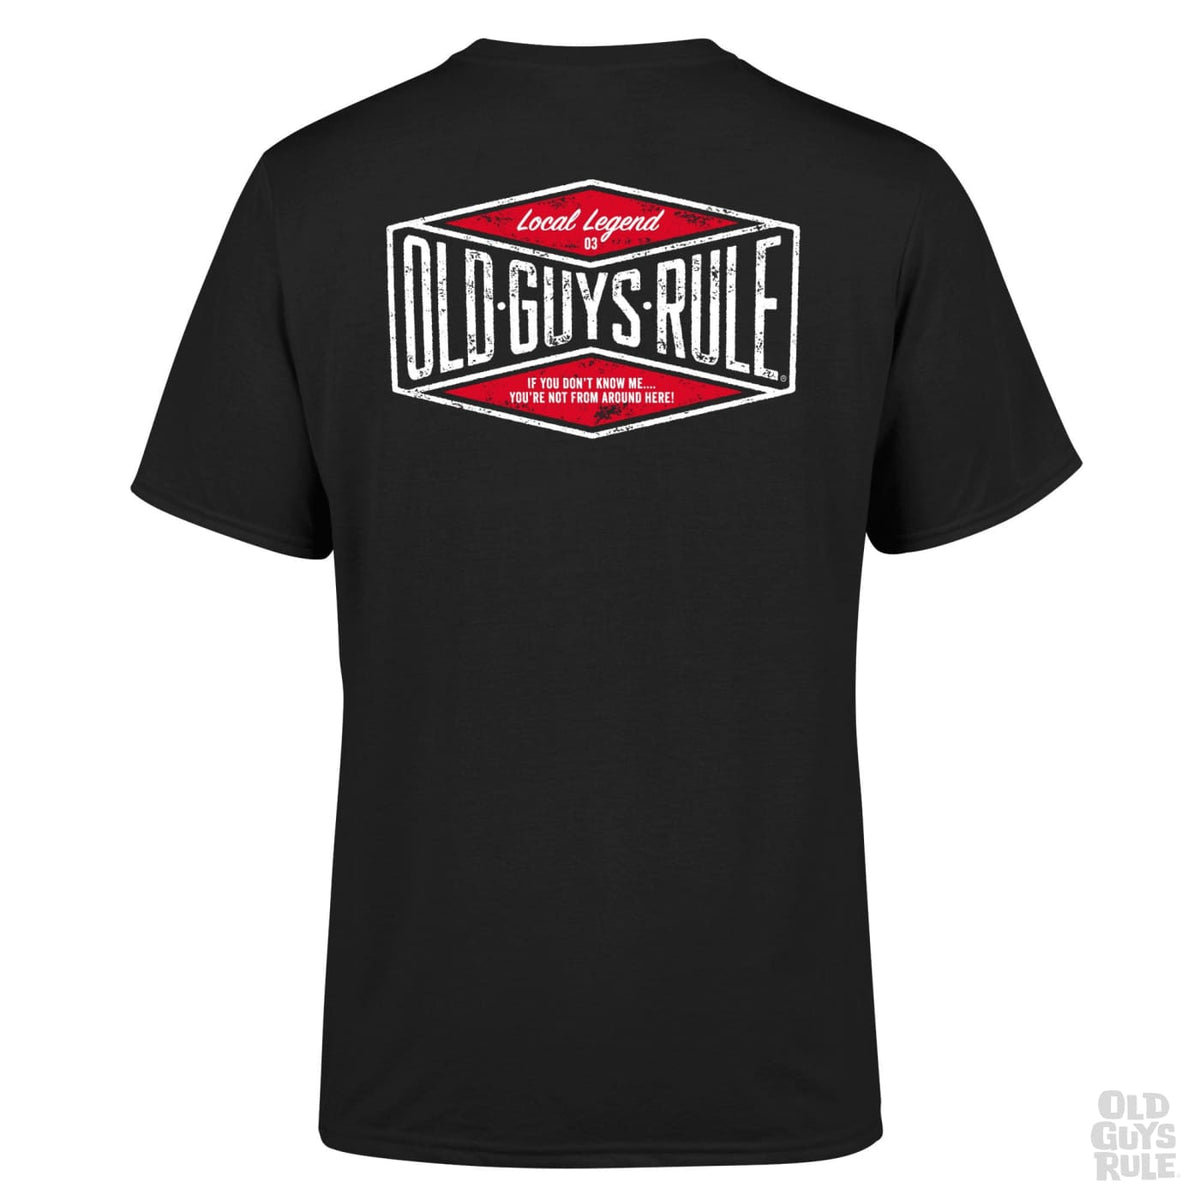 Old Guys Rule Local Legend III T-Shirt - Black. Best gifts for dads. Best gifts for him. Men&#39;s T-shirts. Men&#39;s T-shirts Graphic. Men&#39;s T-Shirt sale. Men&#39;s t-shirt pattern..